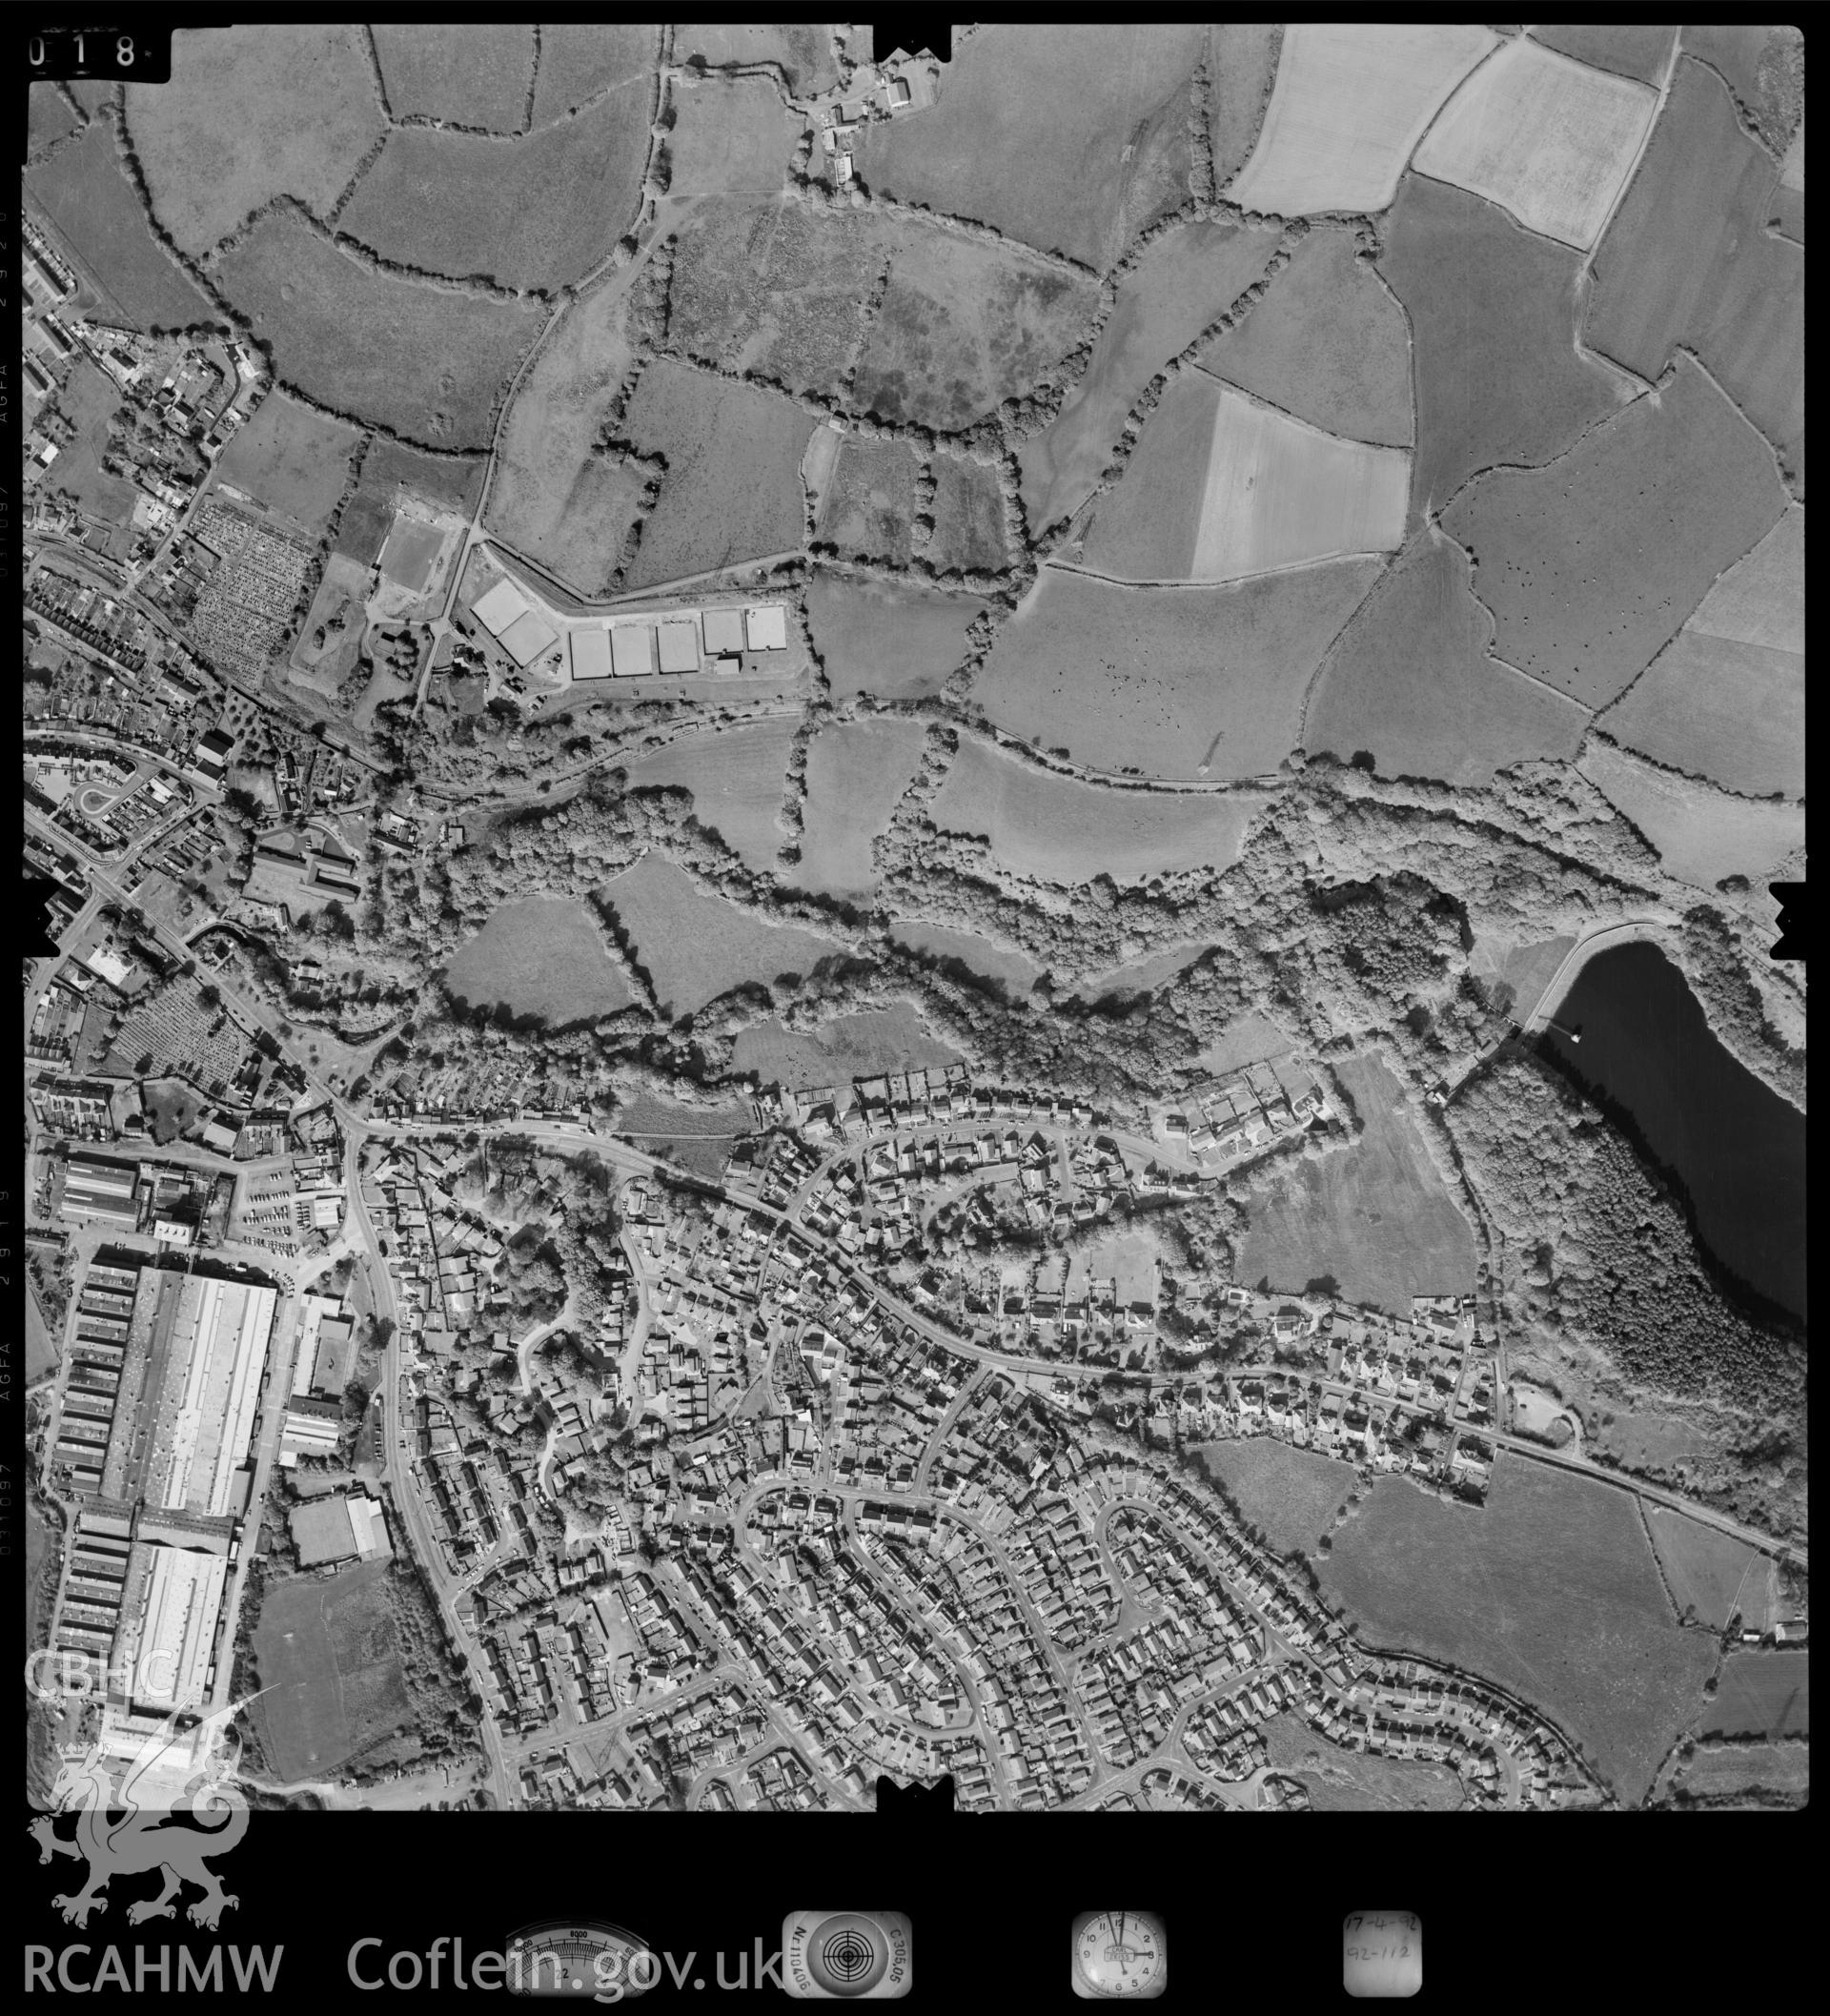 Digitized copy of an aerial photograph showing Gorseinon area, taken by Ordnance Survey, 1992.